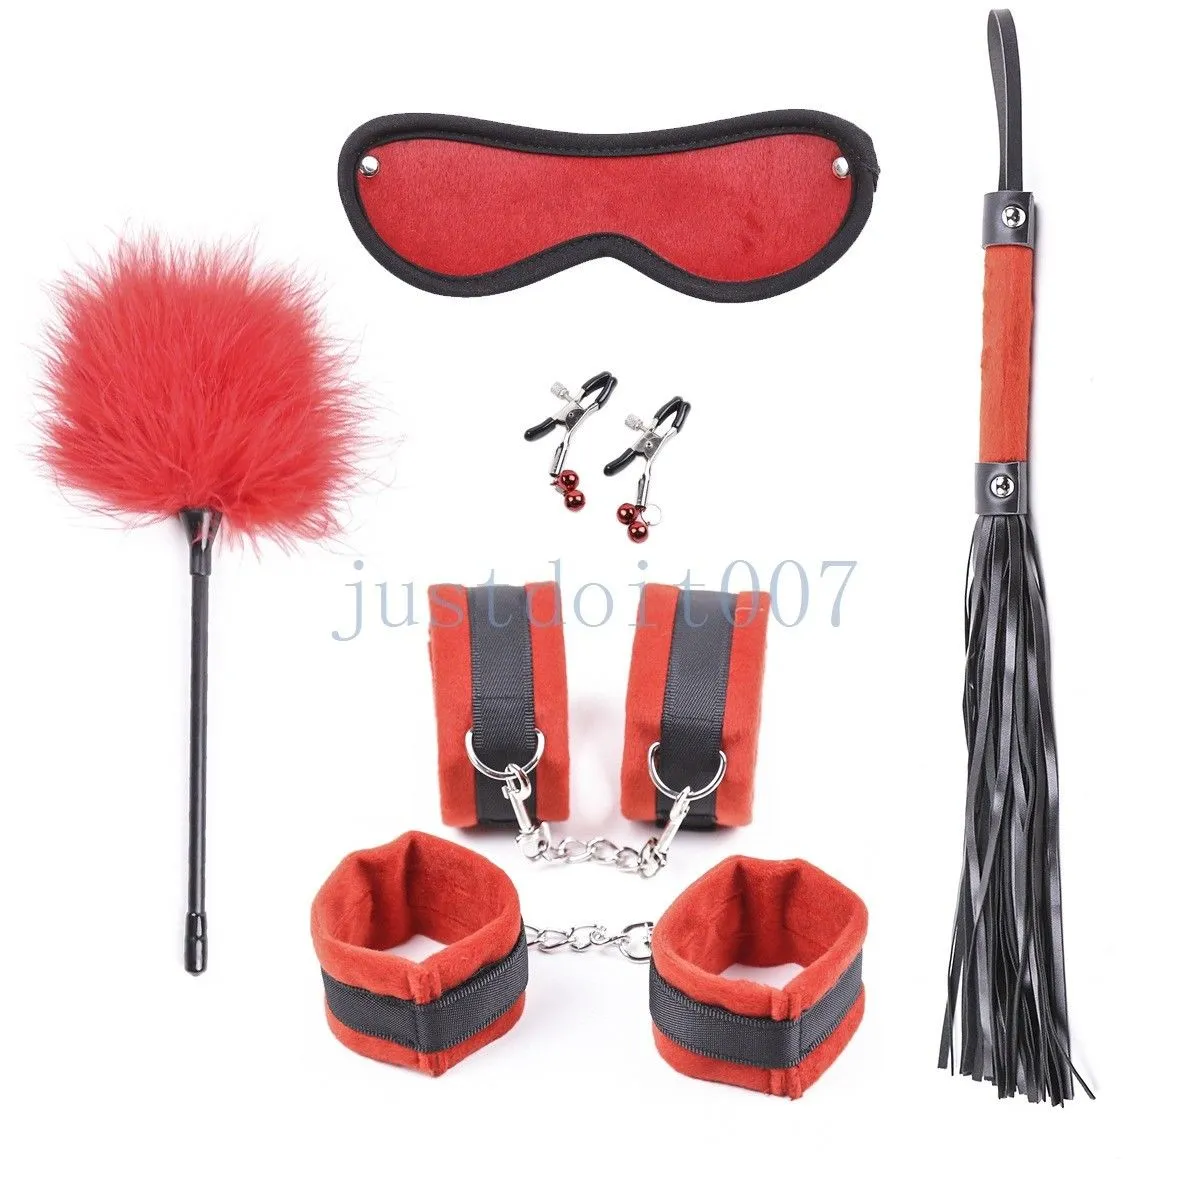 Kinky Restraint Set For Adult Games Includes Collar, Whip, Handankle, And  Cuffs Perfect Gift For Foreplay And Erotic Play By Nxy SM From Sexuality,  $27.28